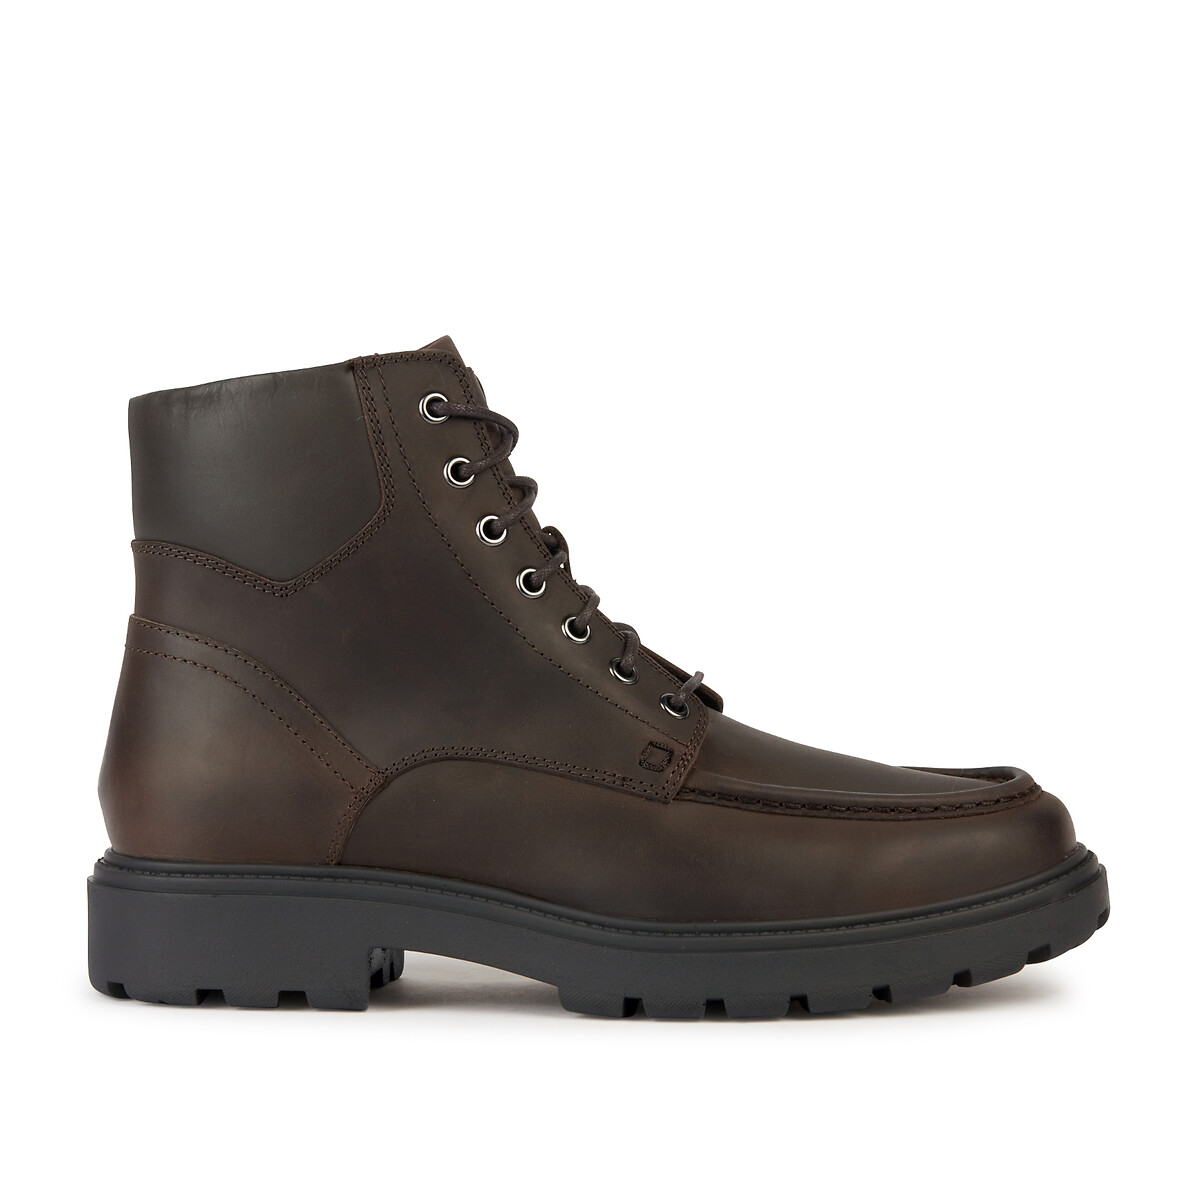 Spherica EC7 Ankle Boots in Breathable Leather